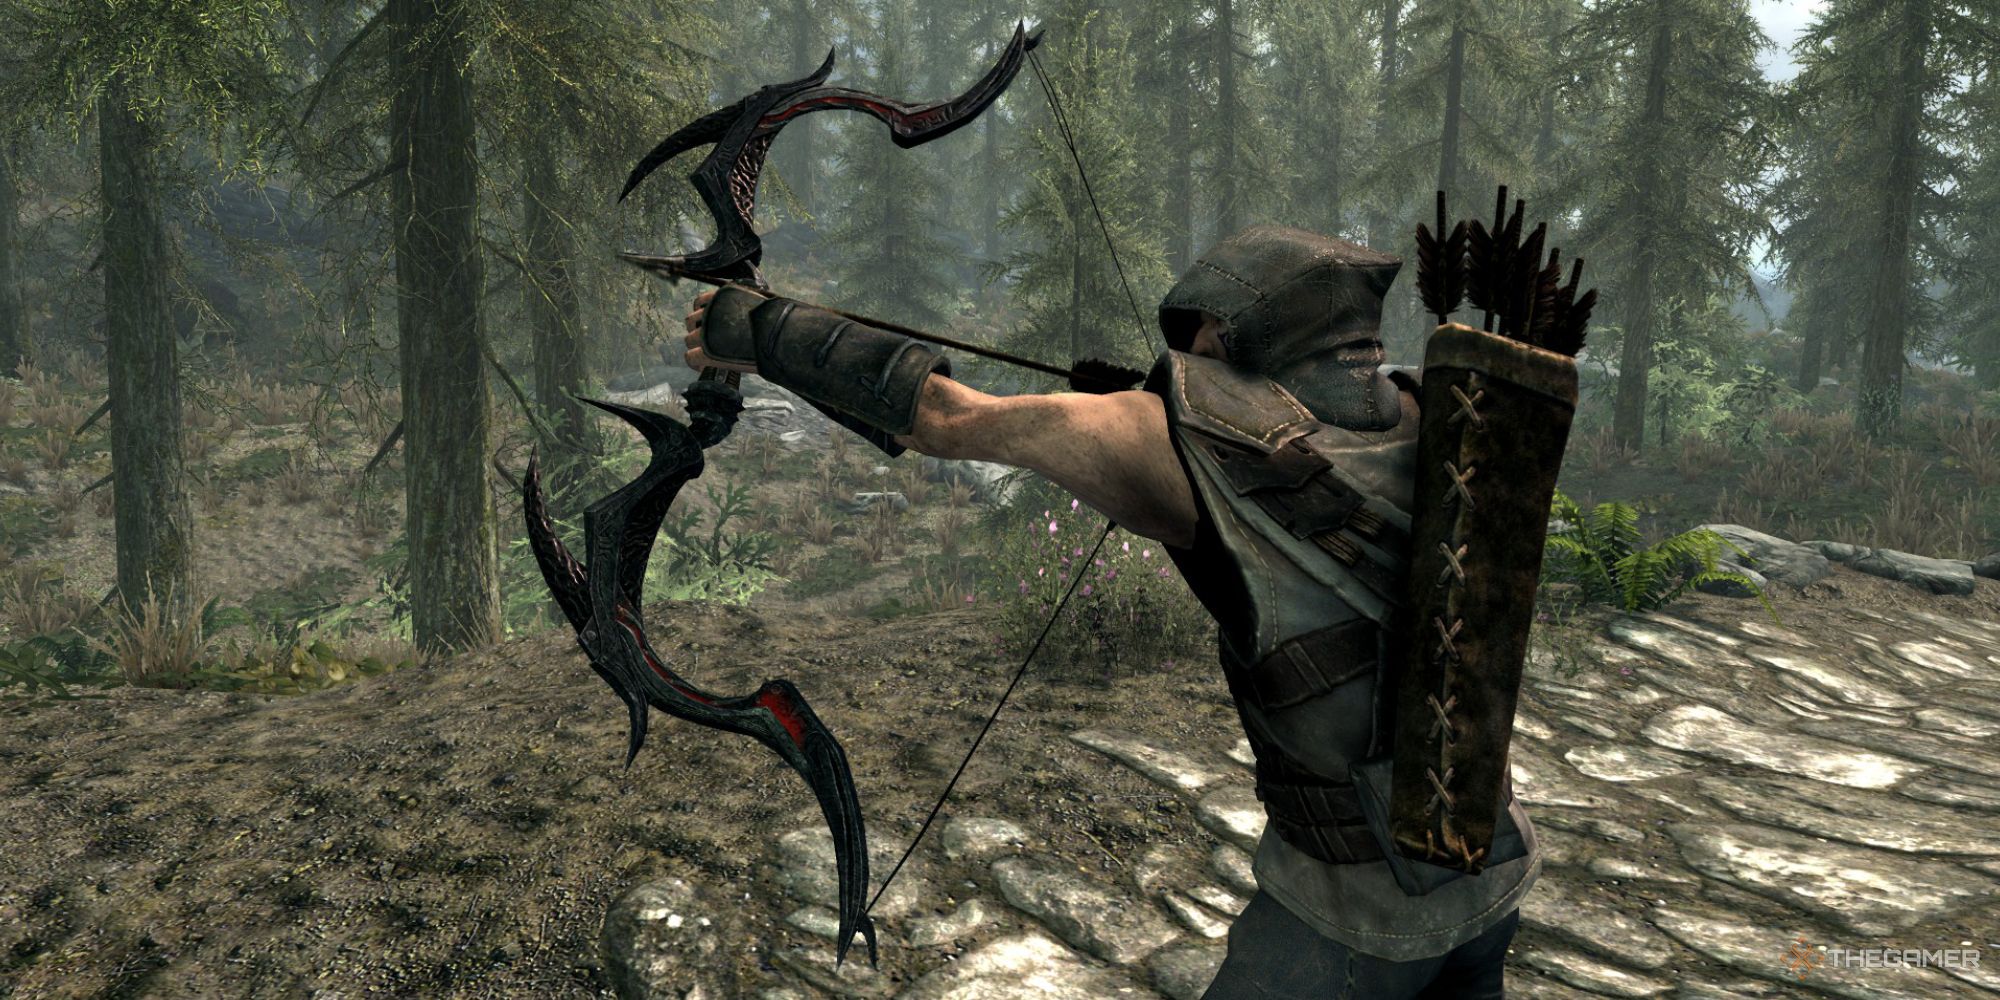 The Player Holding a Daedric Bow in Skyrim